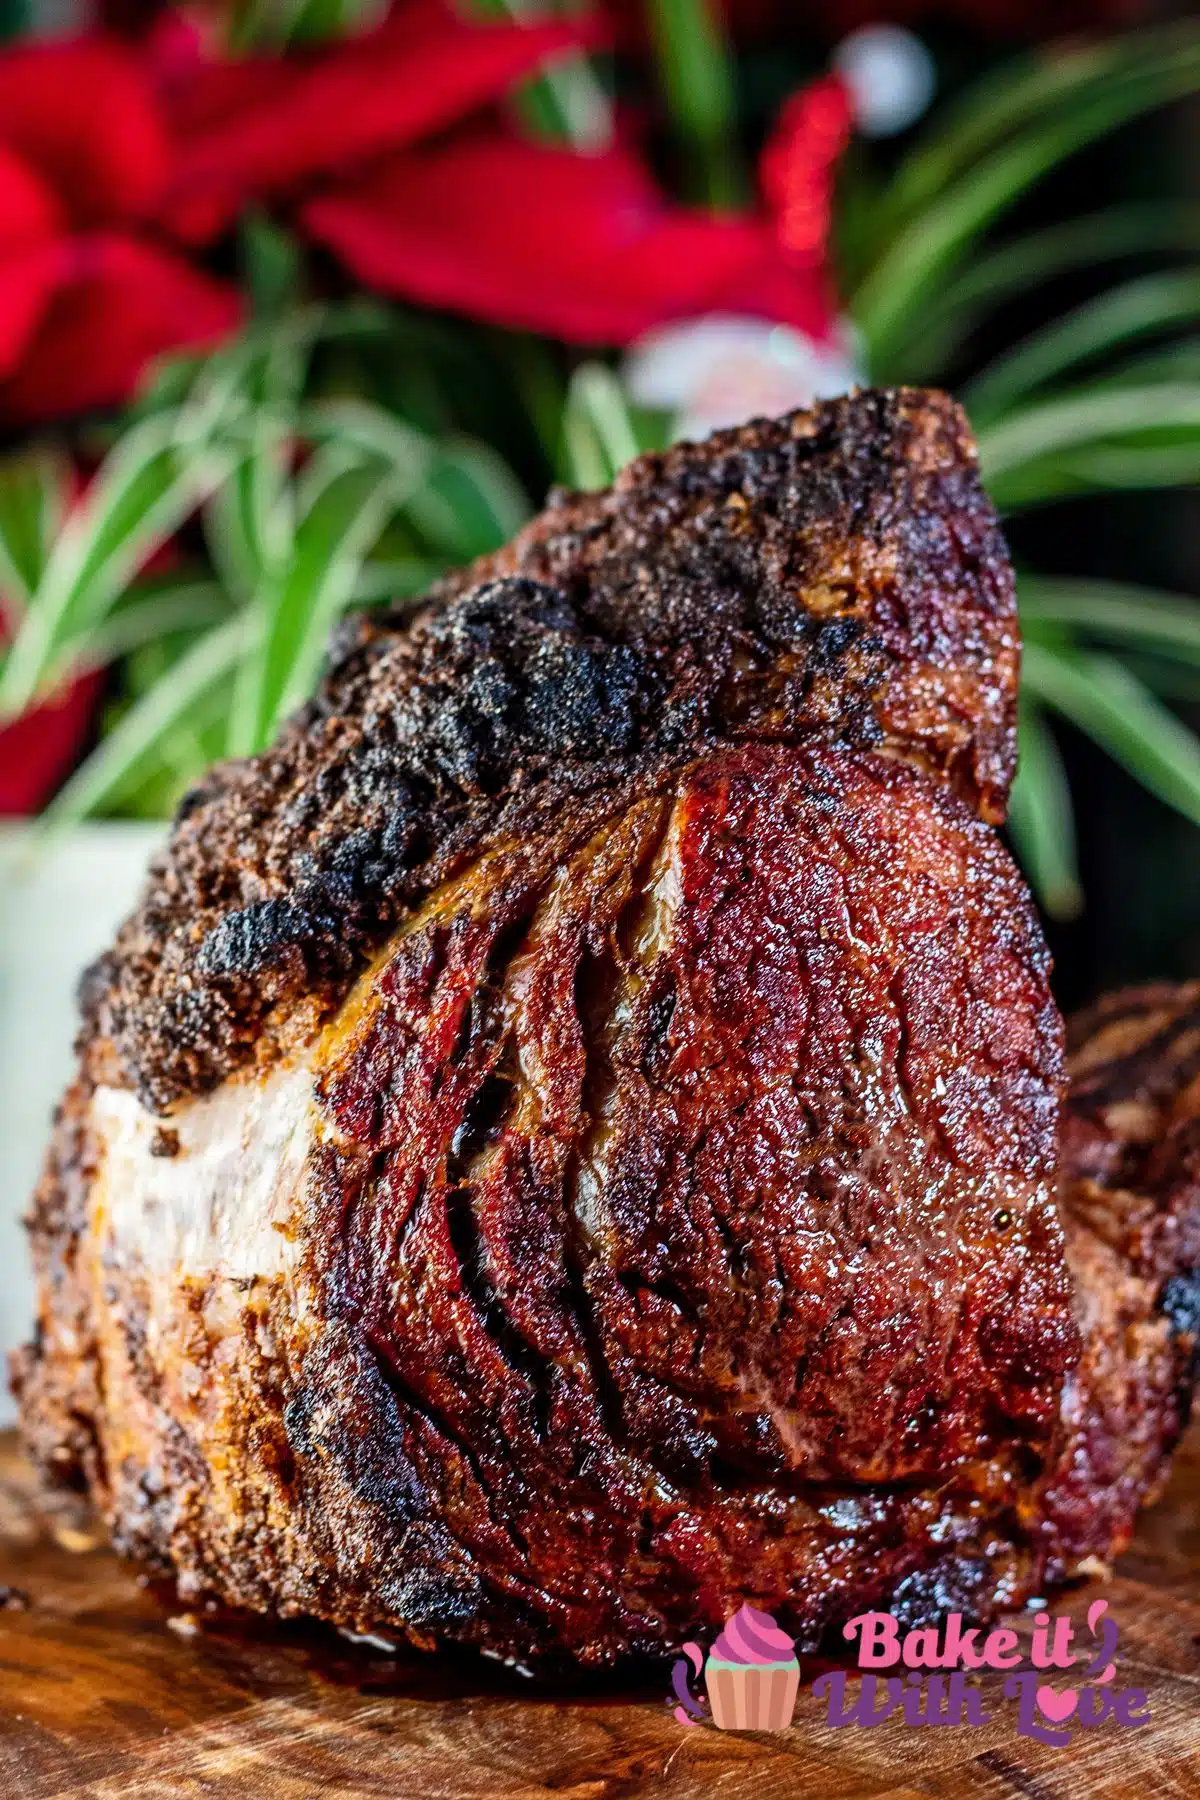 No peek prime rib set upright with holiday centerpiece in the background.